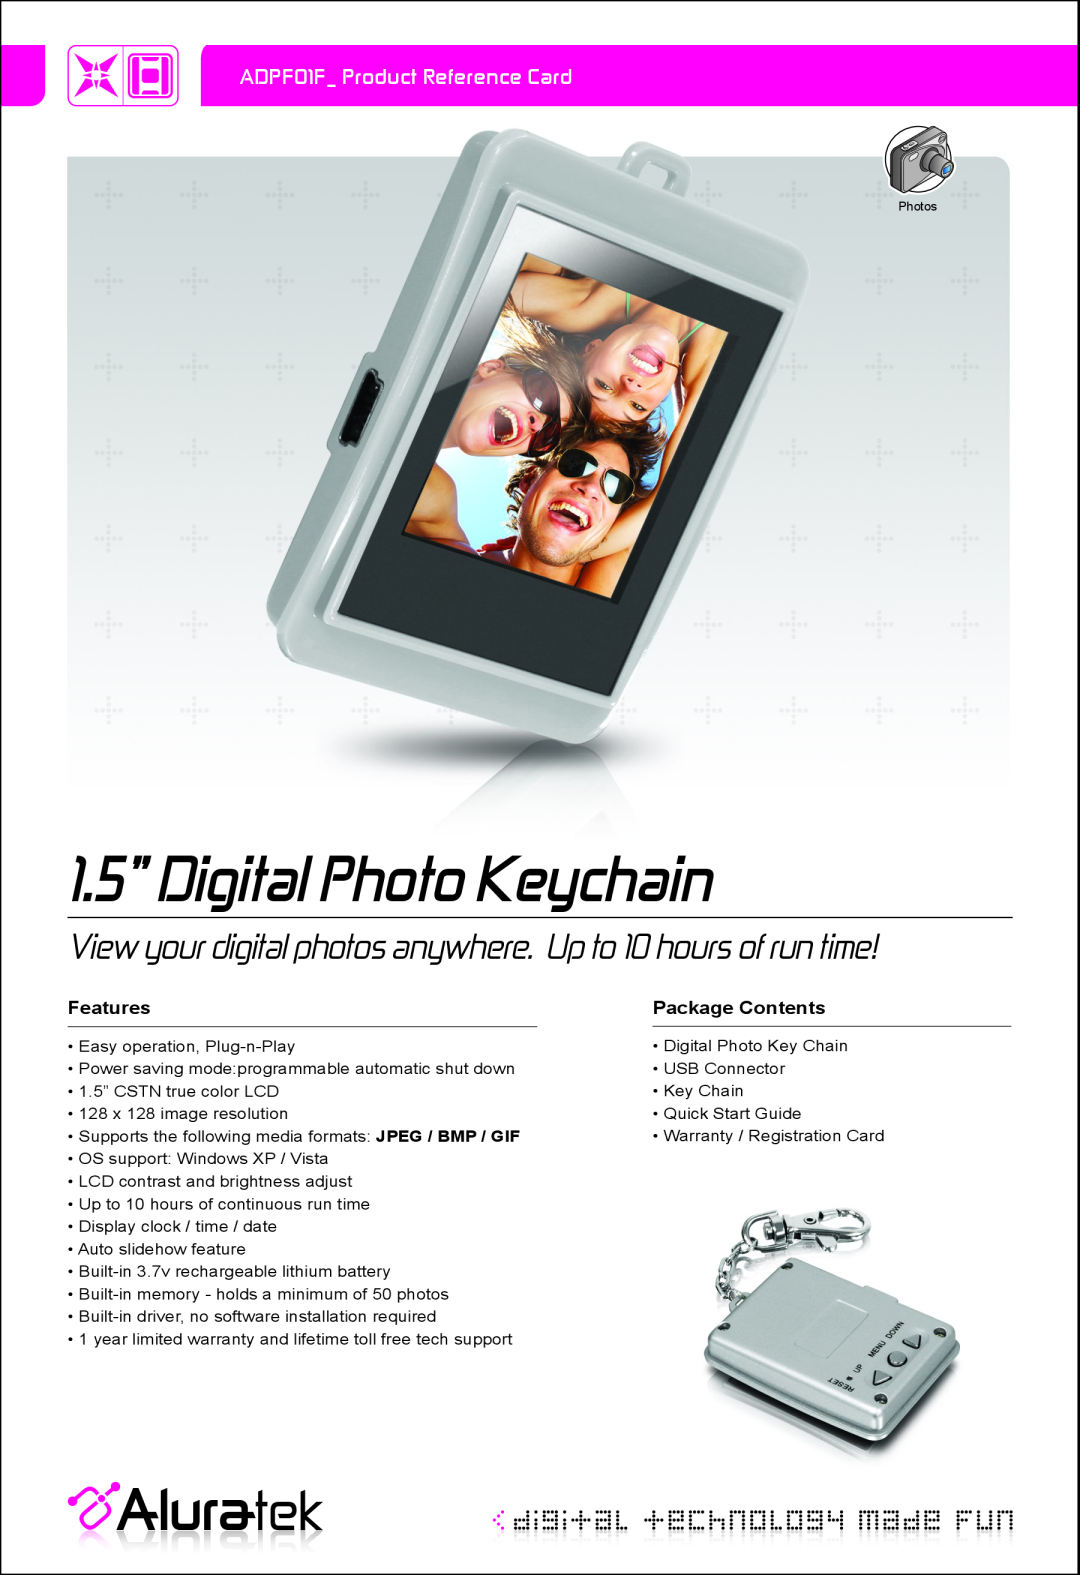 Aluratek ADPF01F warranty 1.5” Digital Photo Keychain, View your digital photos anywhere. Up to 10 hours of run time 